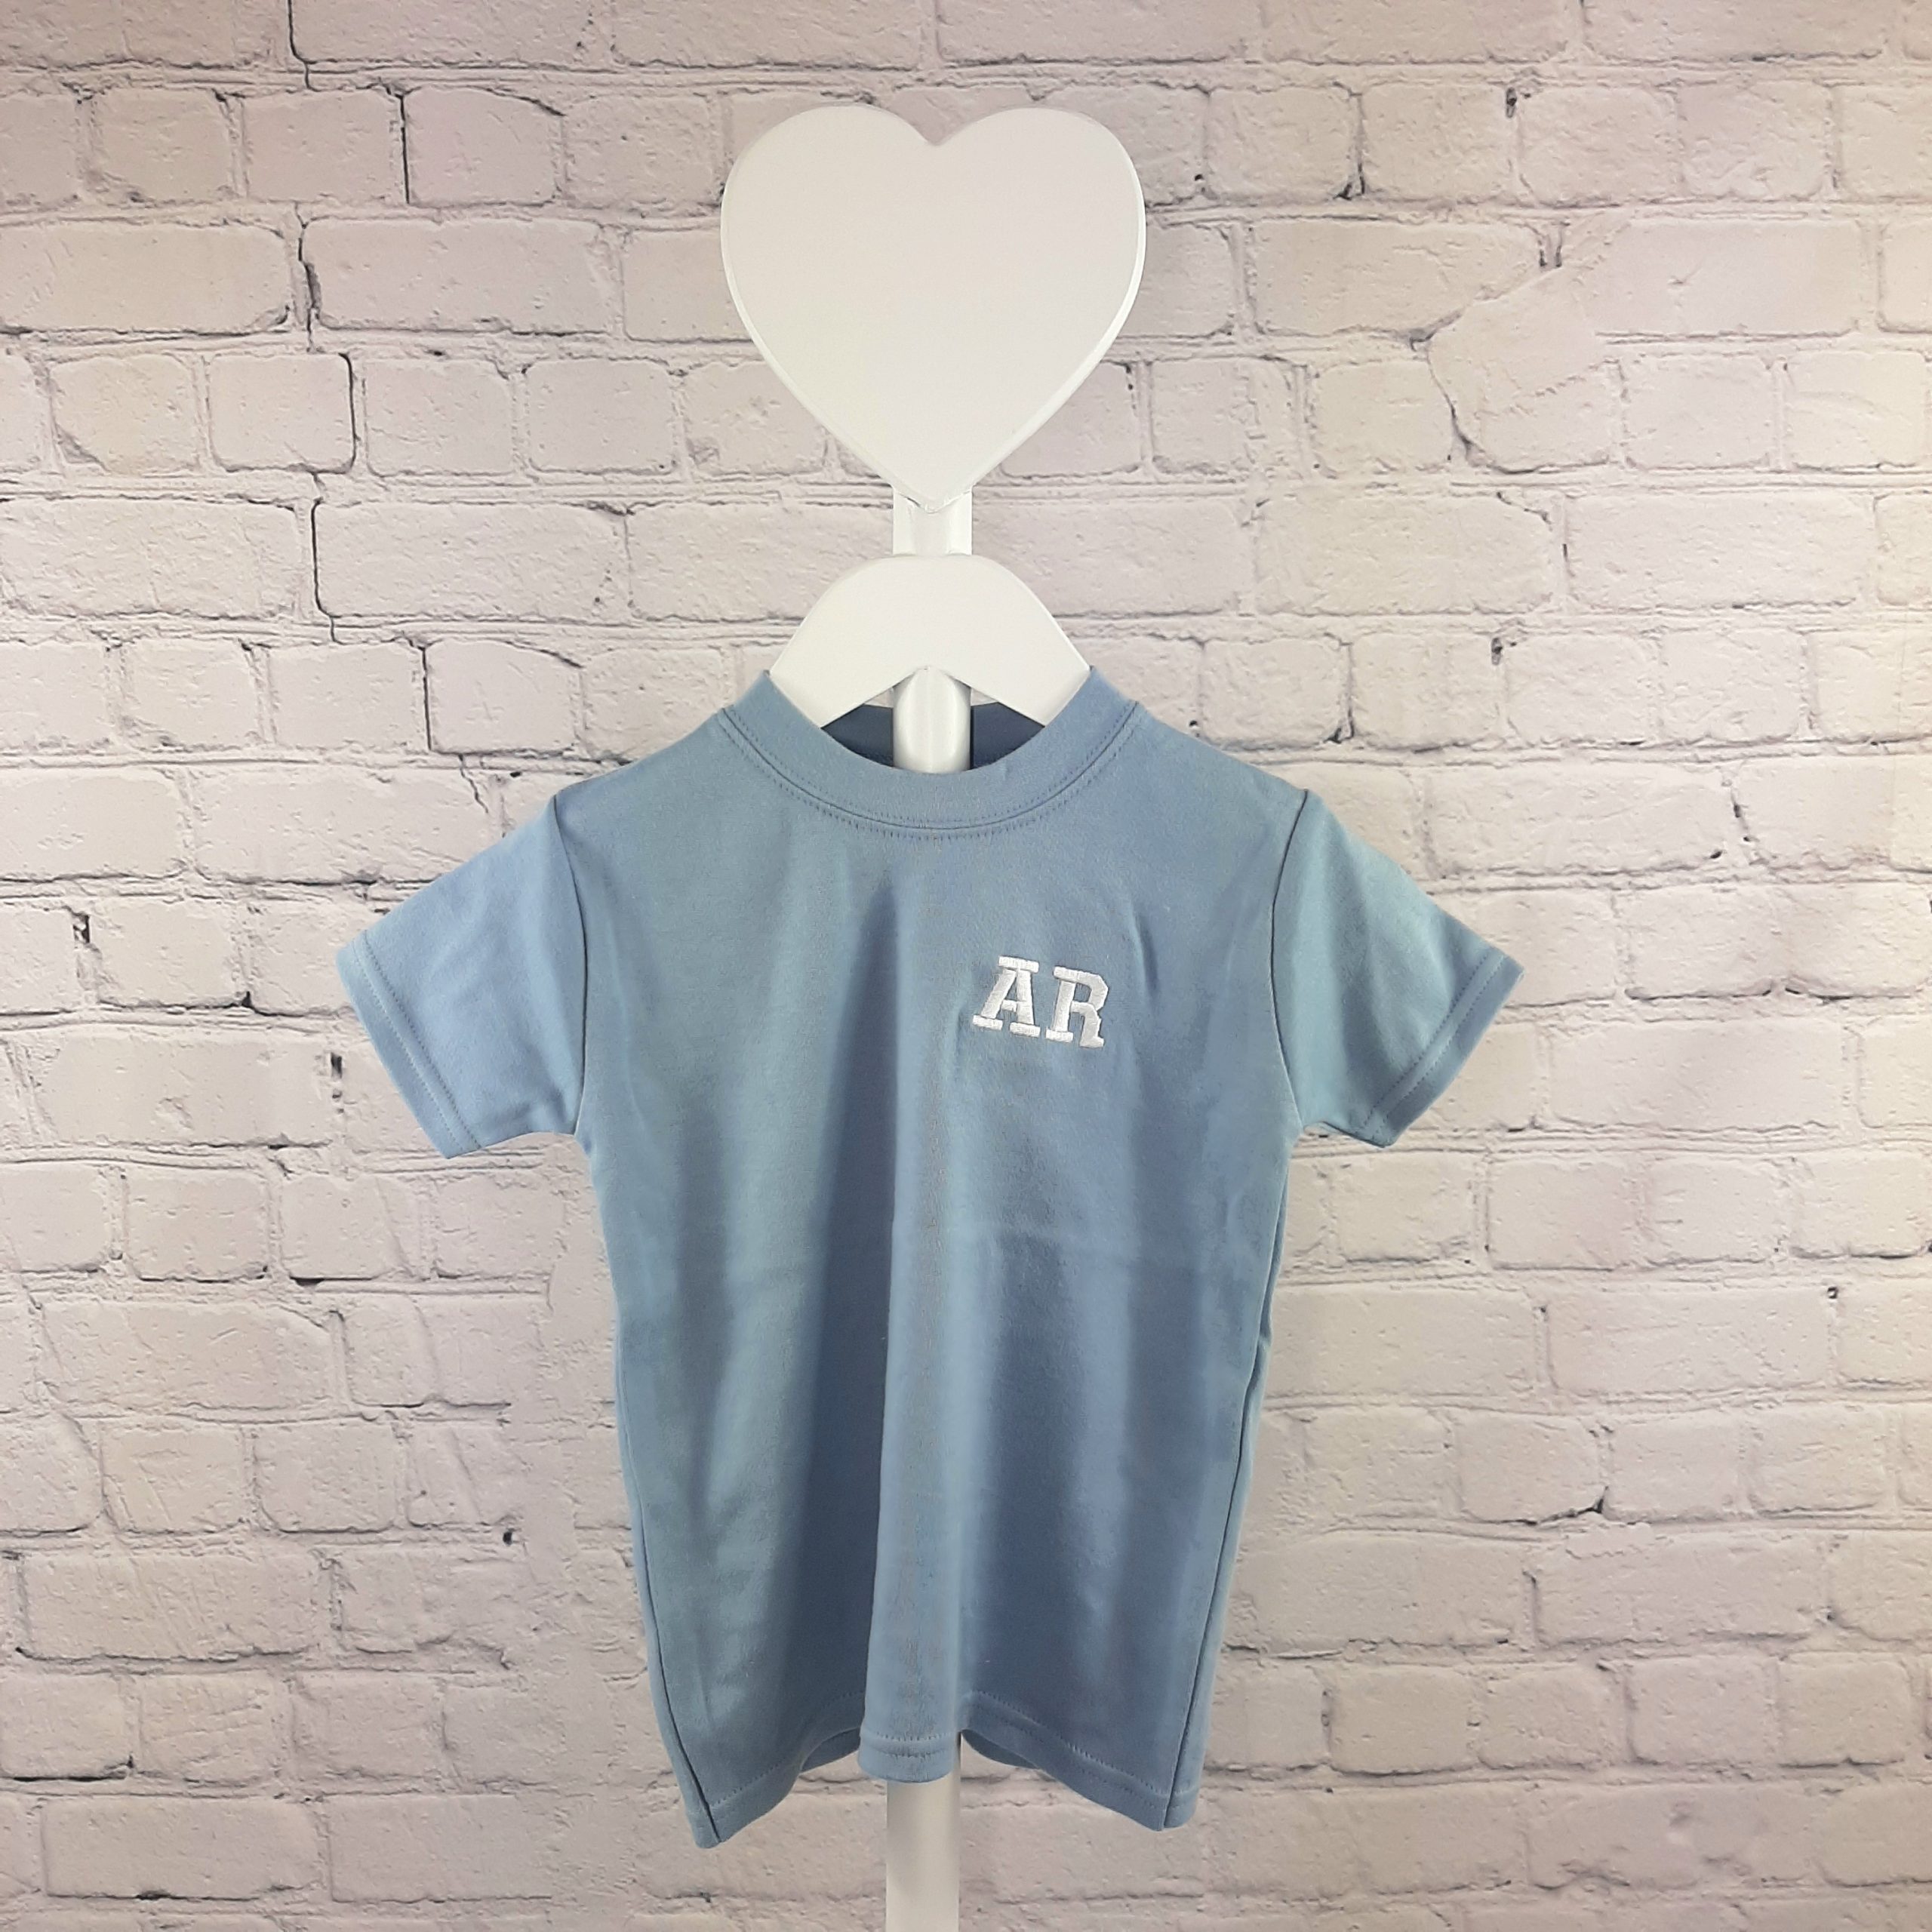 dusky blue childrens t shirt with embroidered initials